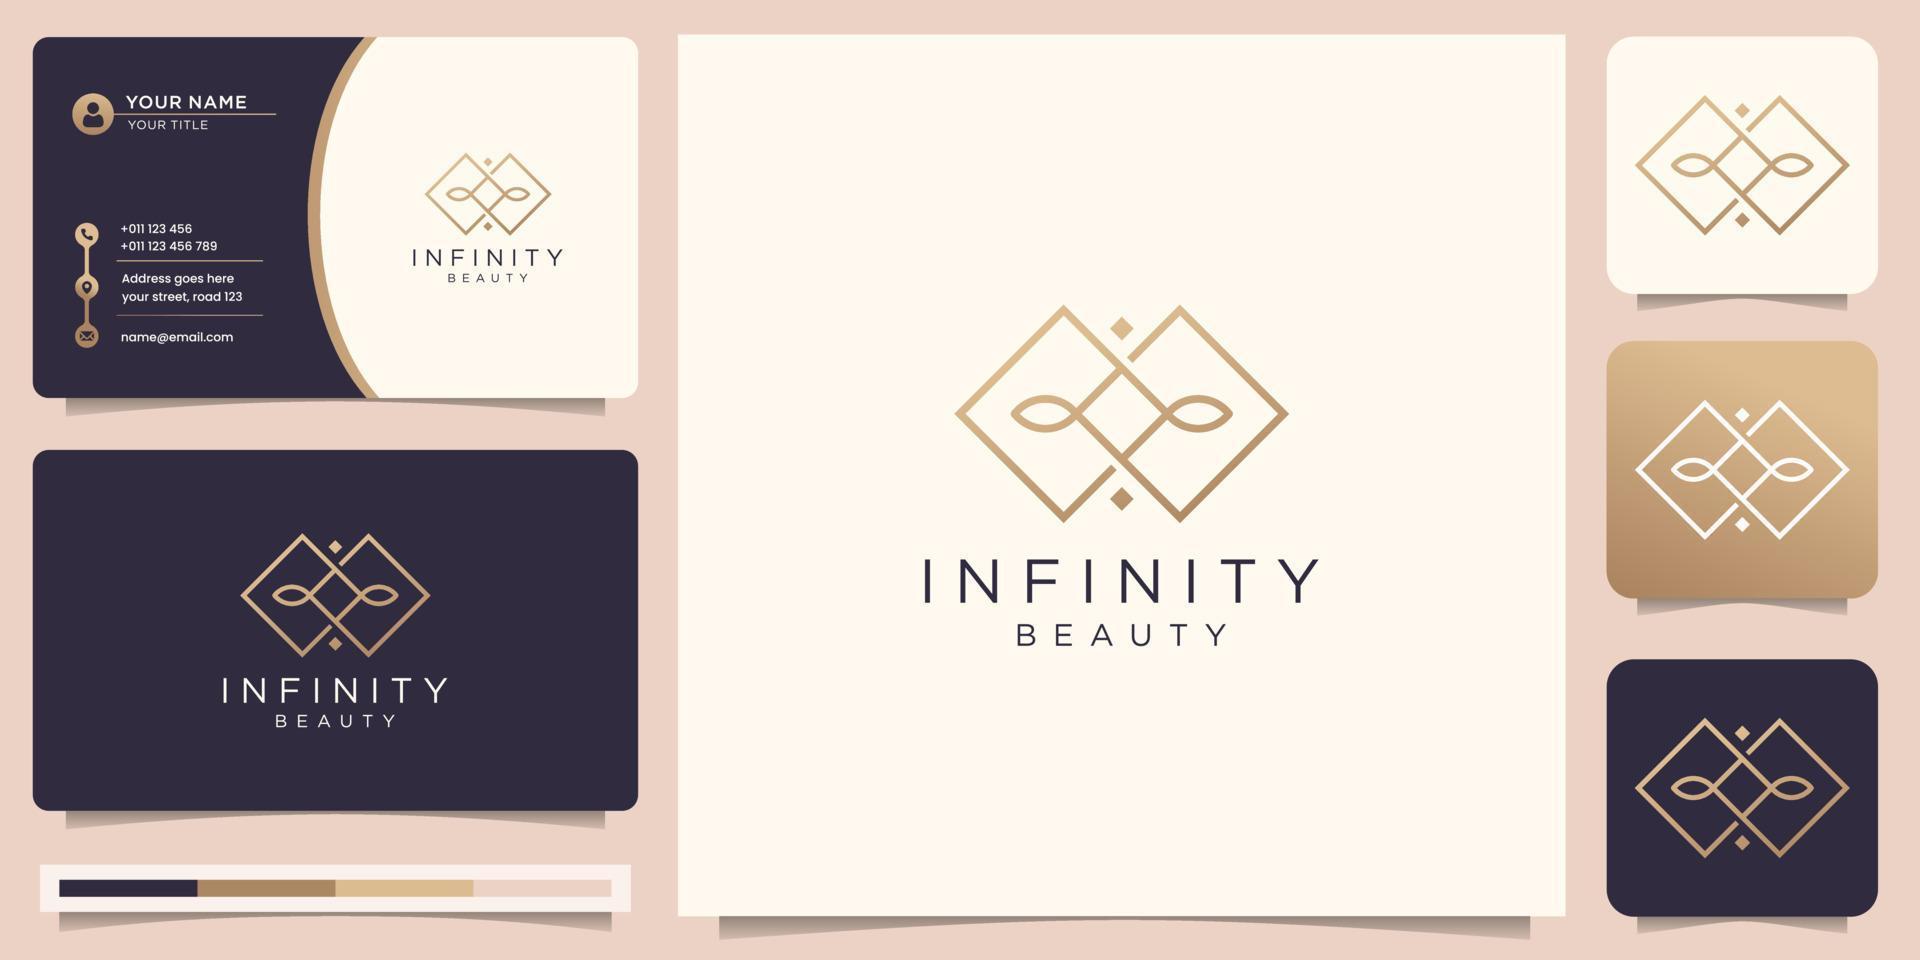 minimalist infinity beauty logo design inspiration.logo can be use for business of fashion,boutique. vector